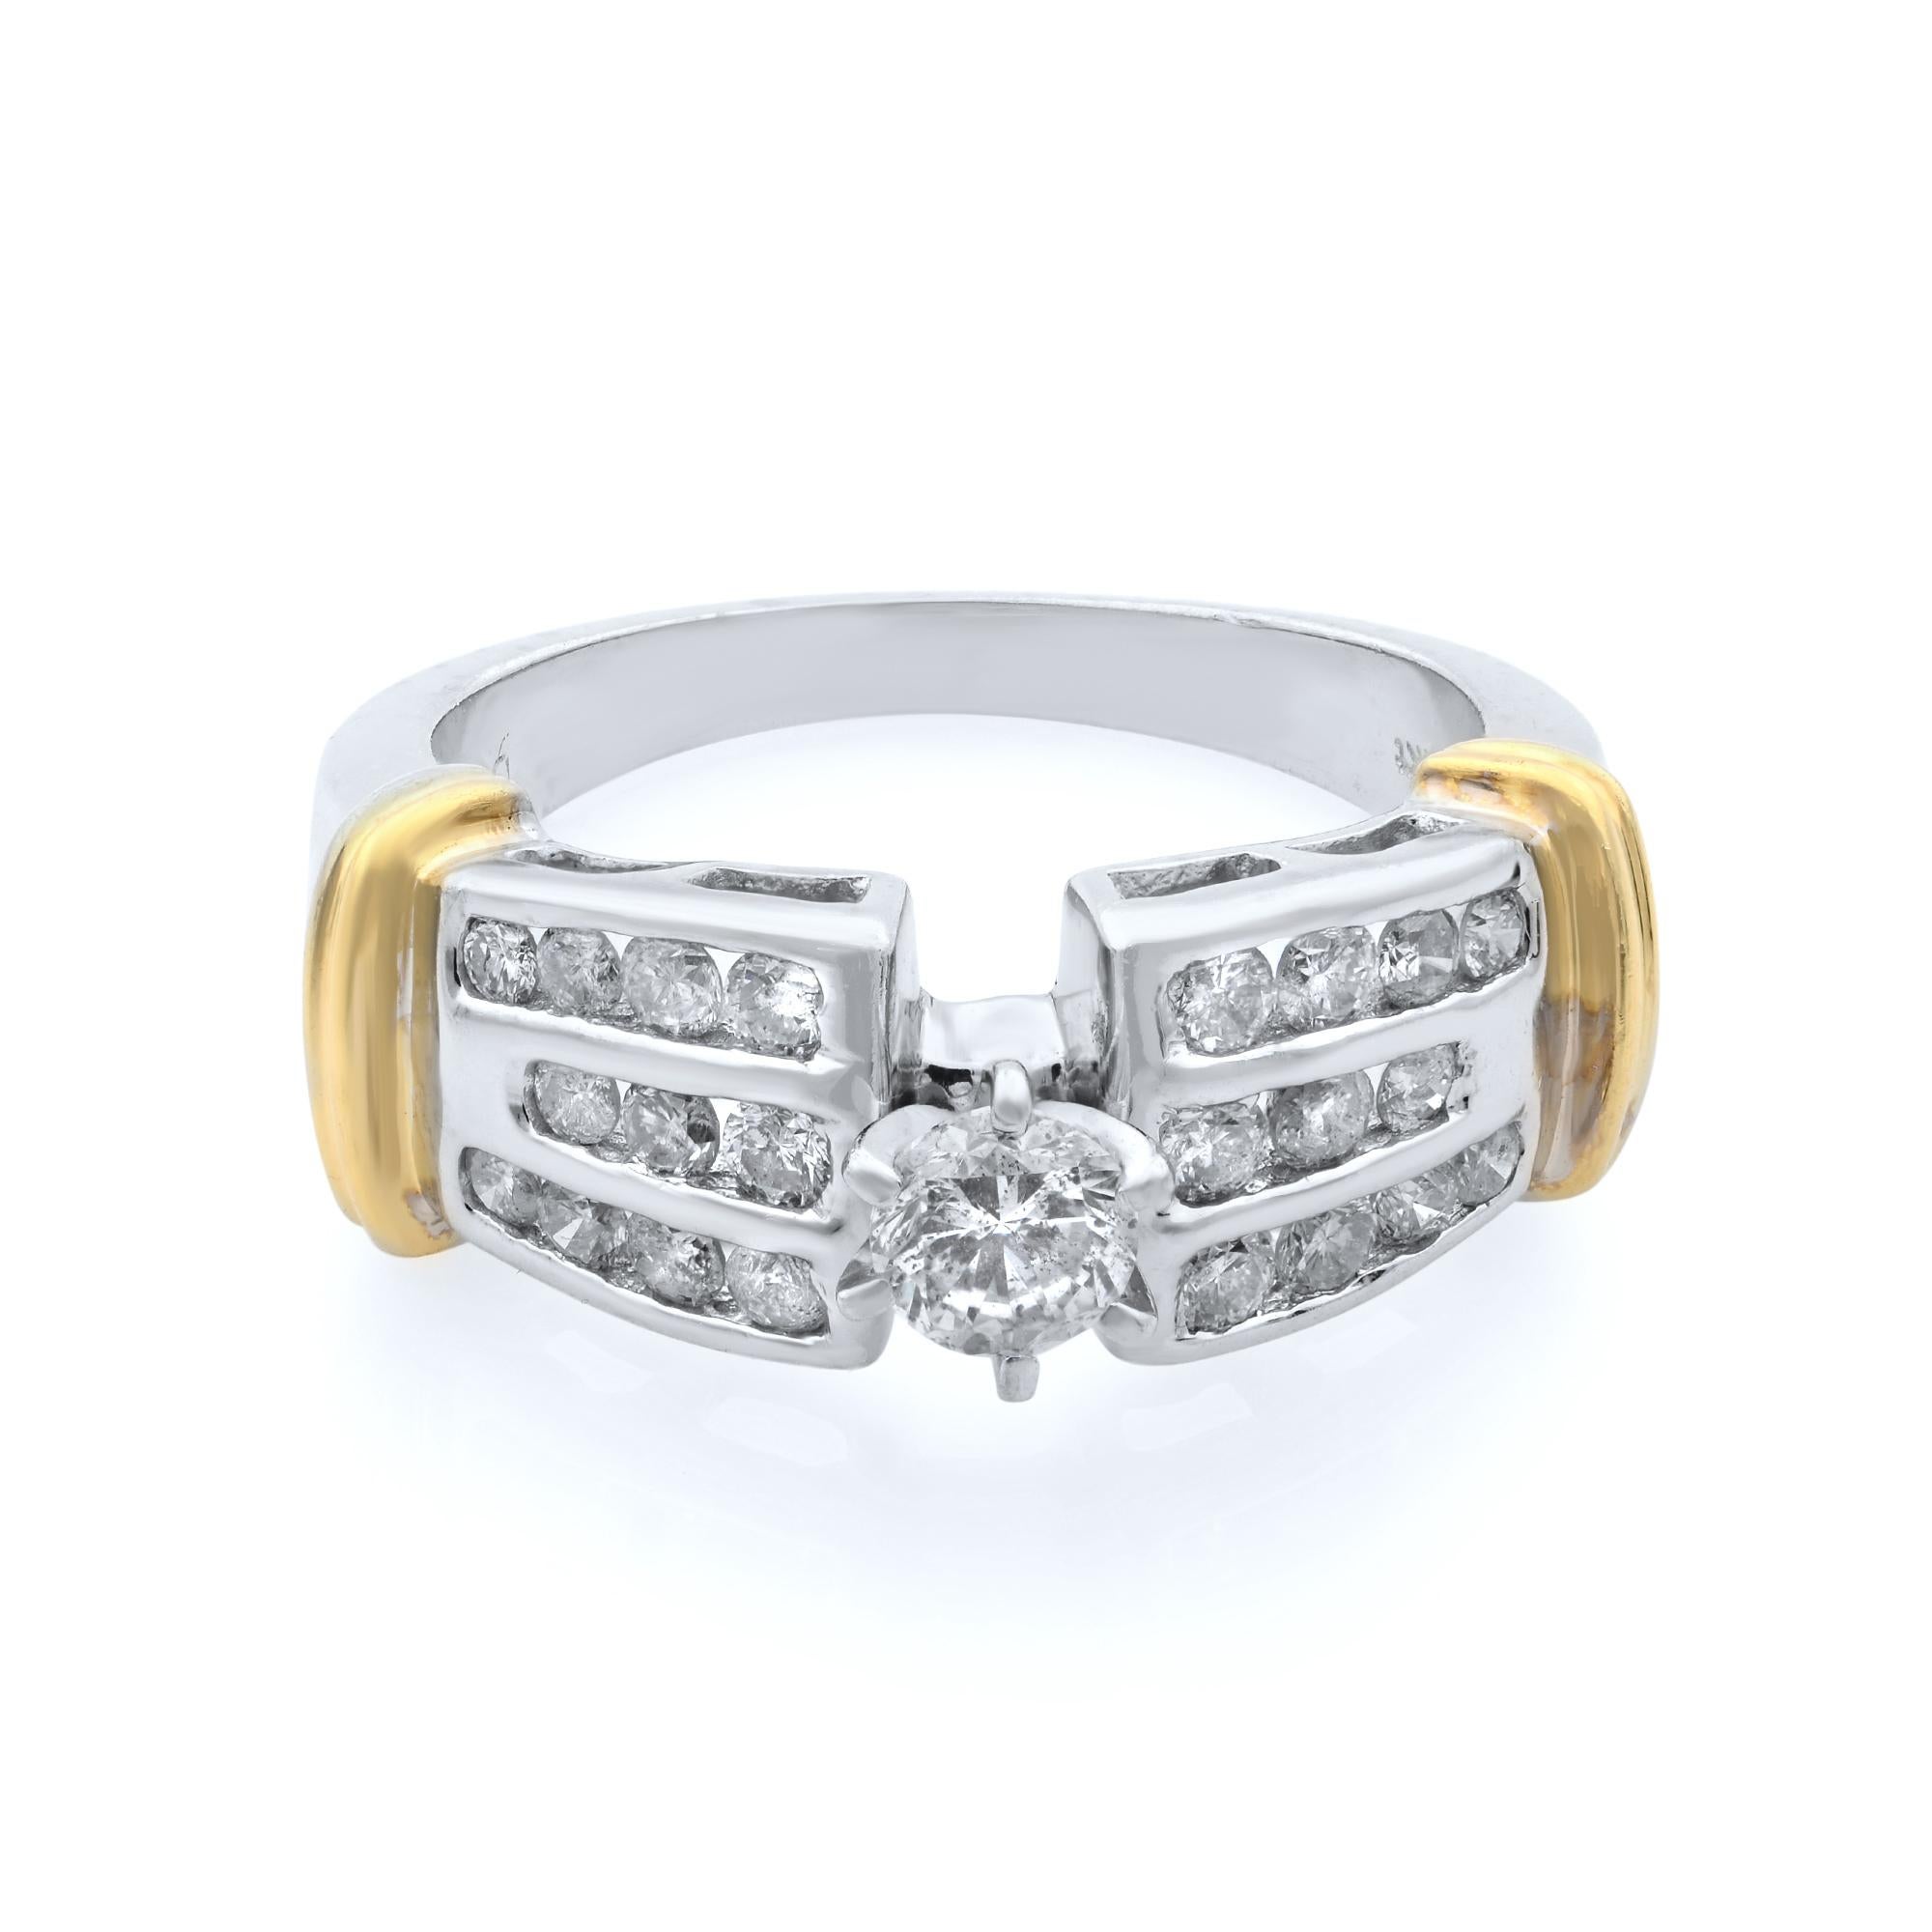 This Unworn beautiful diamond ladies ring is crafted in 14k White and 14k Yellow Gold, it features round cut diamonds weighing 0.75cttw with H color and SI2 clarity. Ring Size: 7. Comes with the manufacturer's box and booklet. 